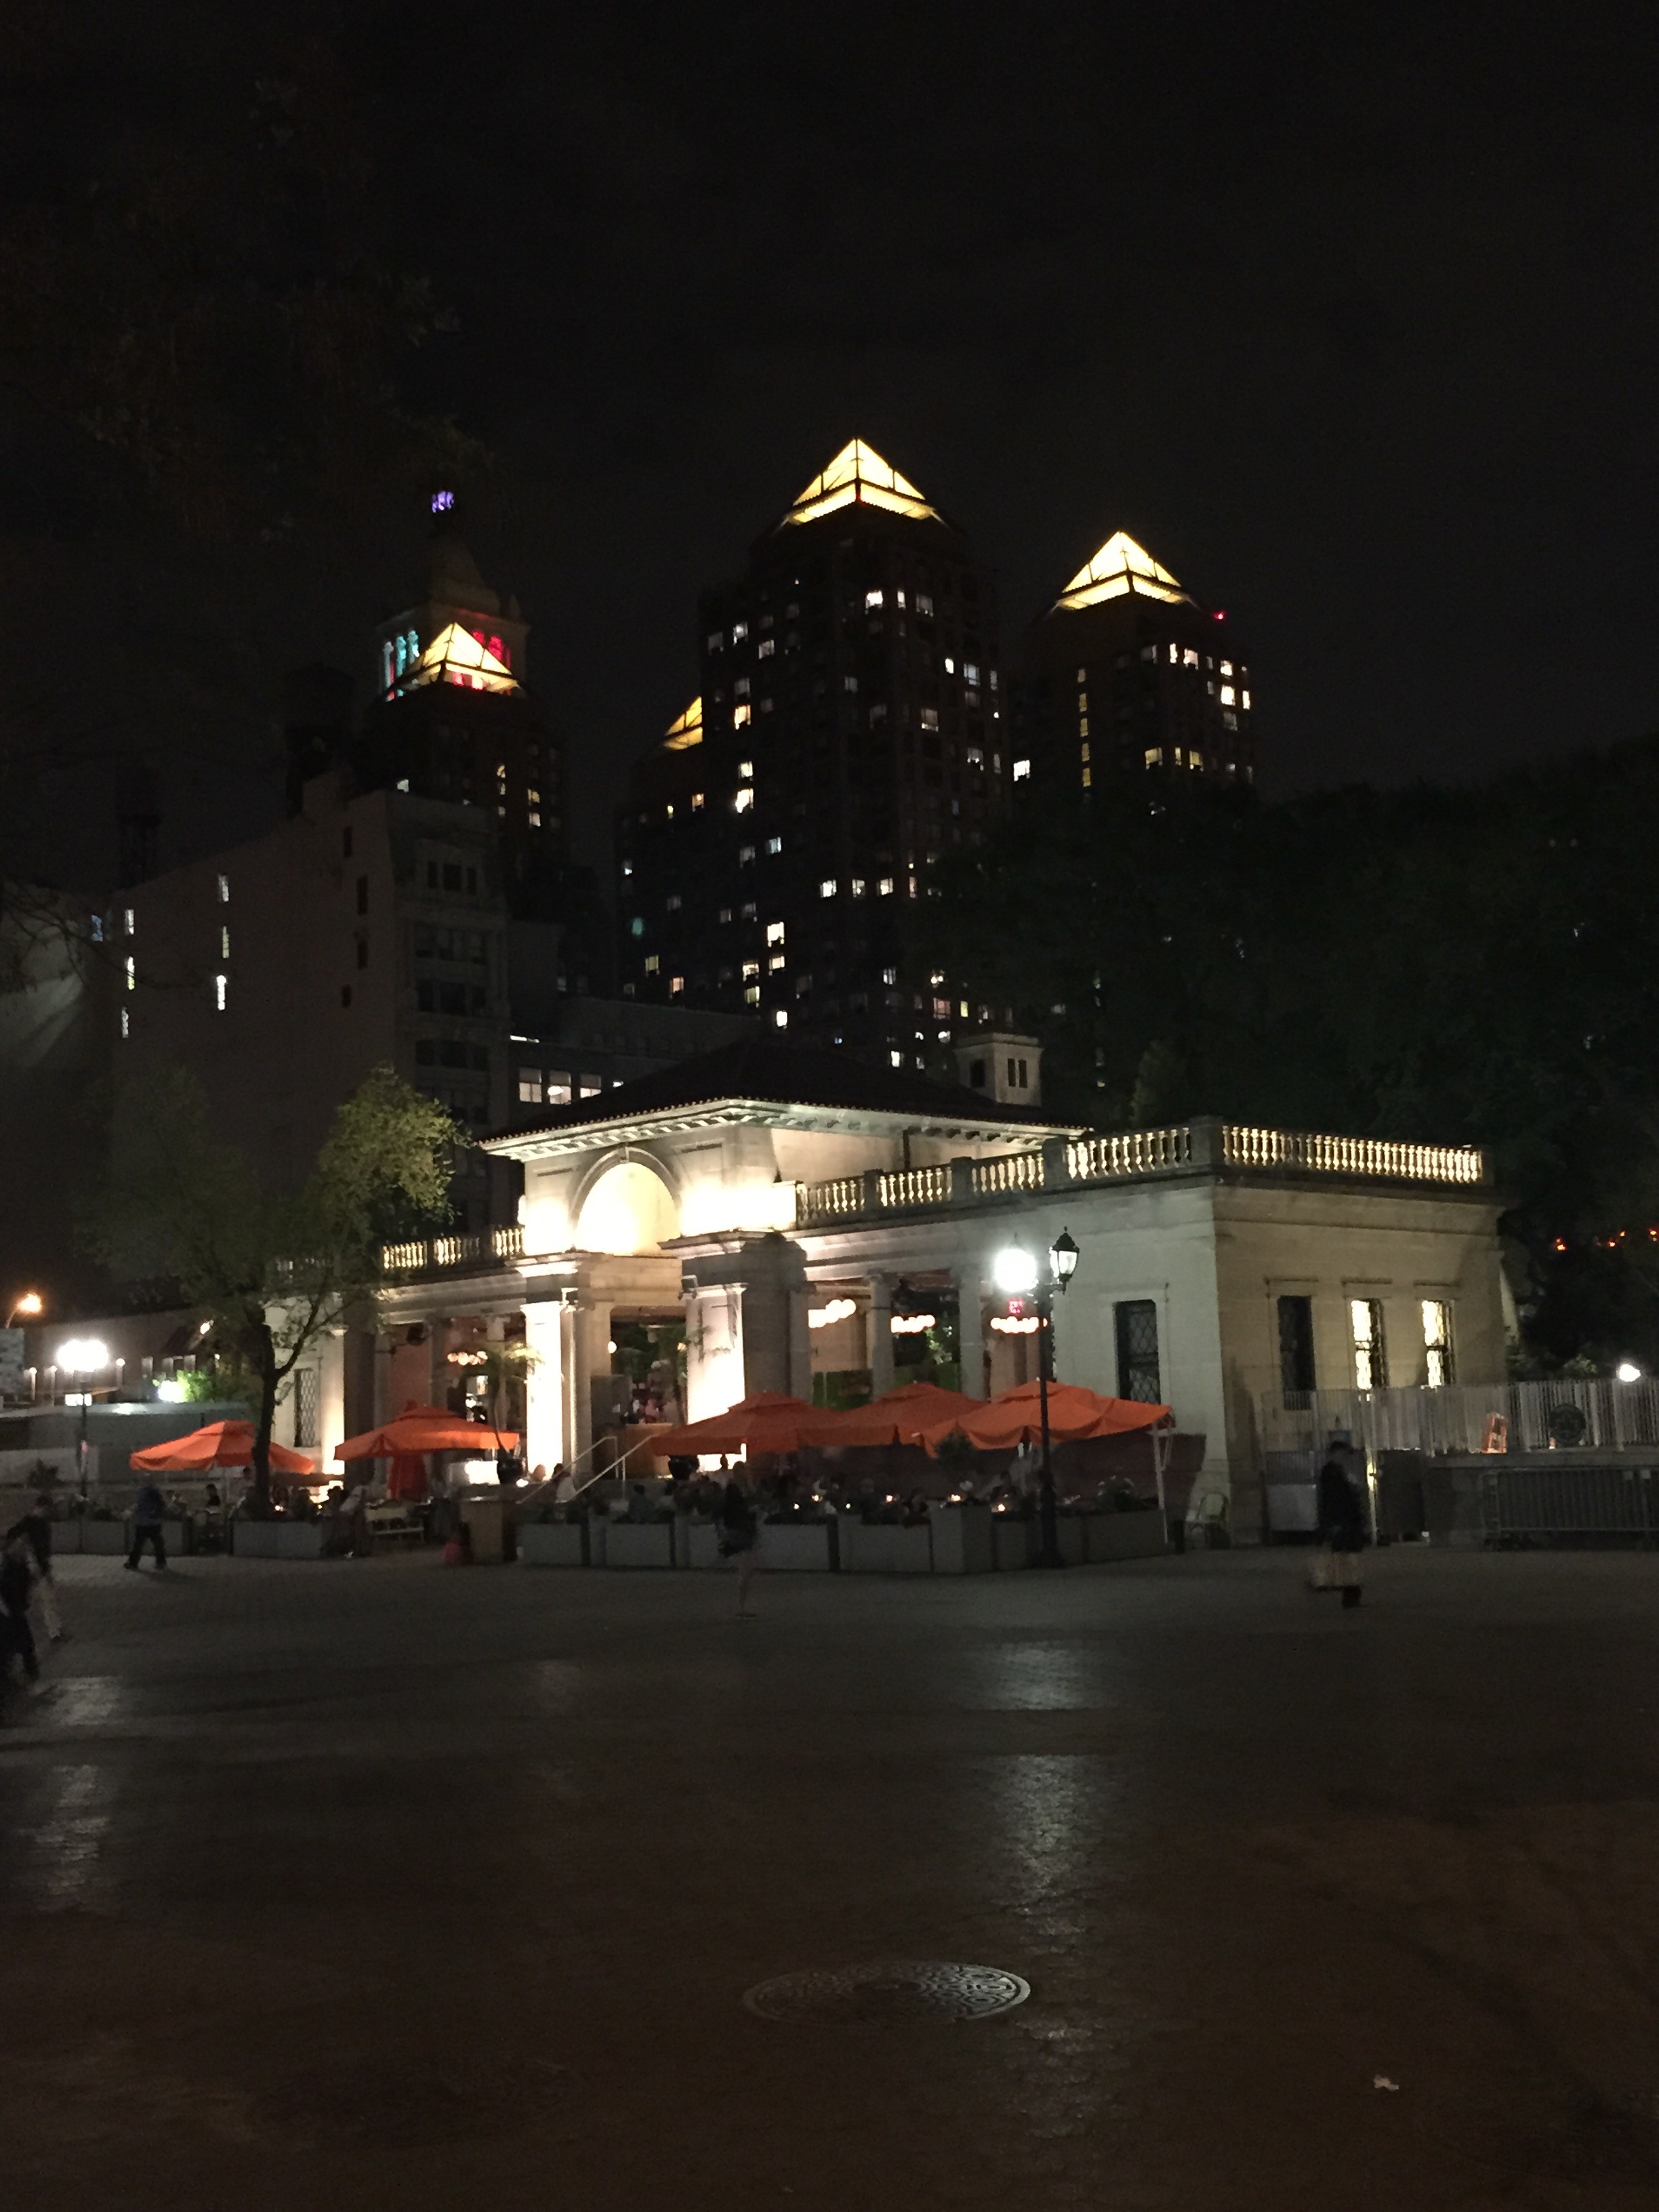 A night photo with the Union Square Pavilion with the Zeckendorf Towers in the background